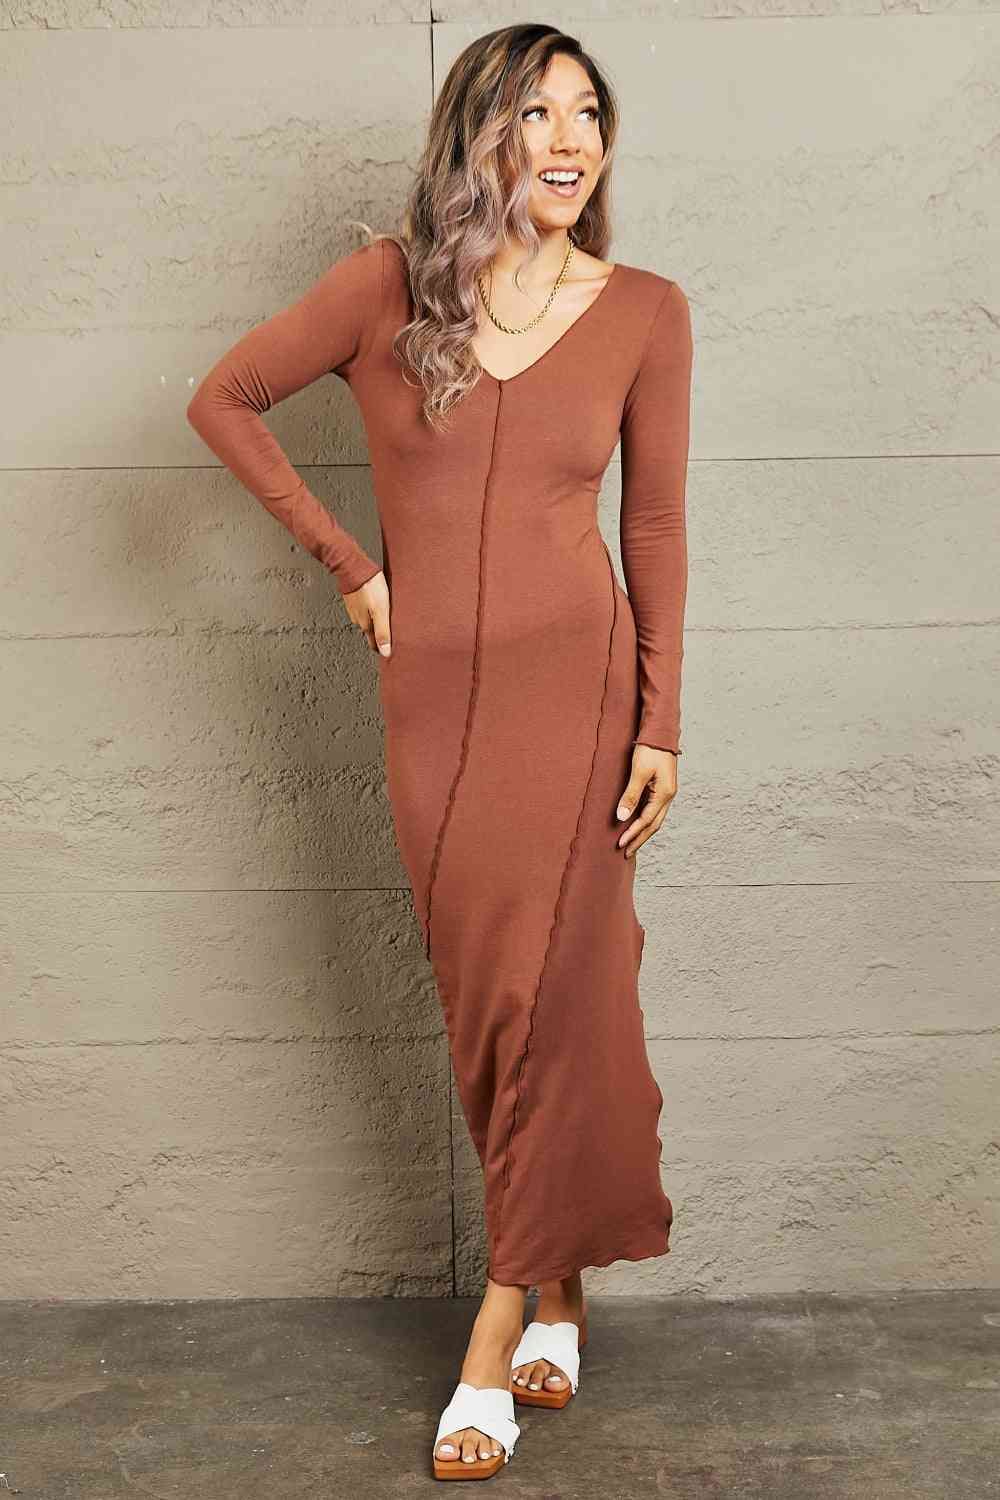 Culture Code For The Night Caramel Bodycon Dress